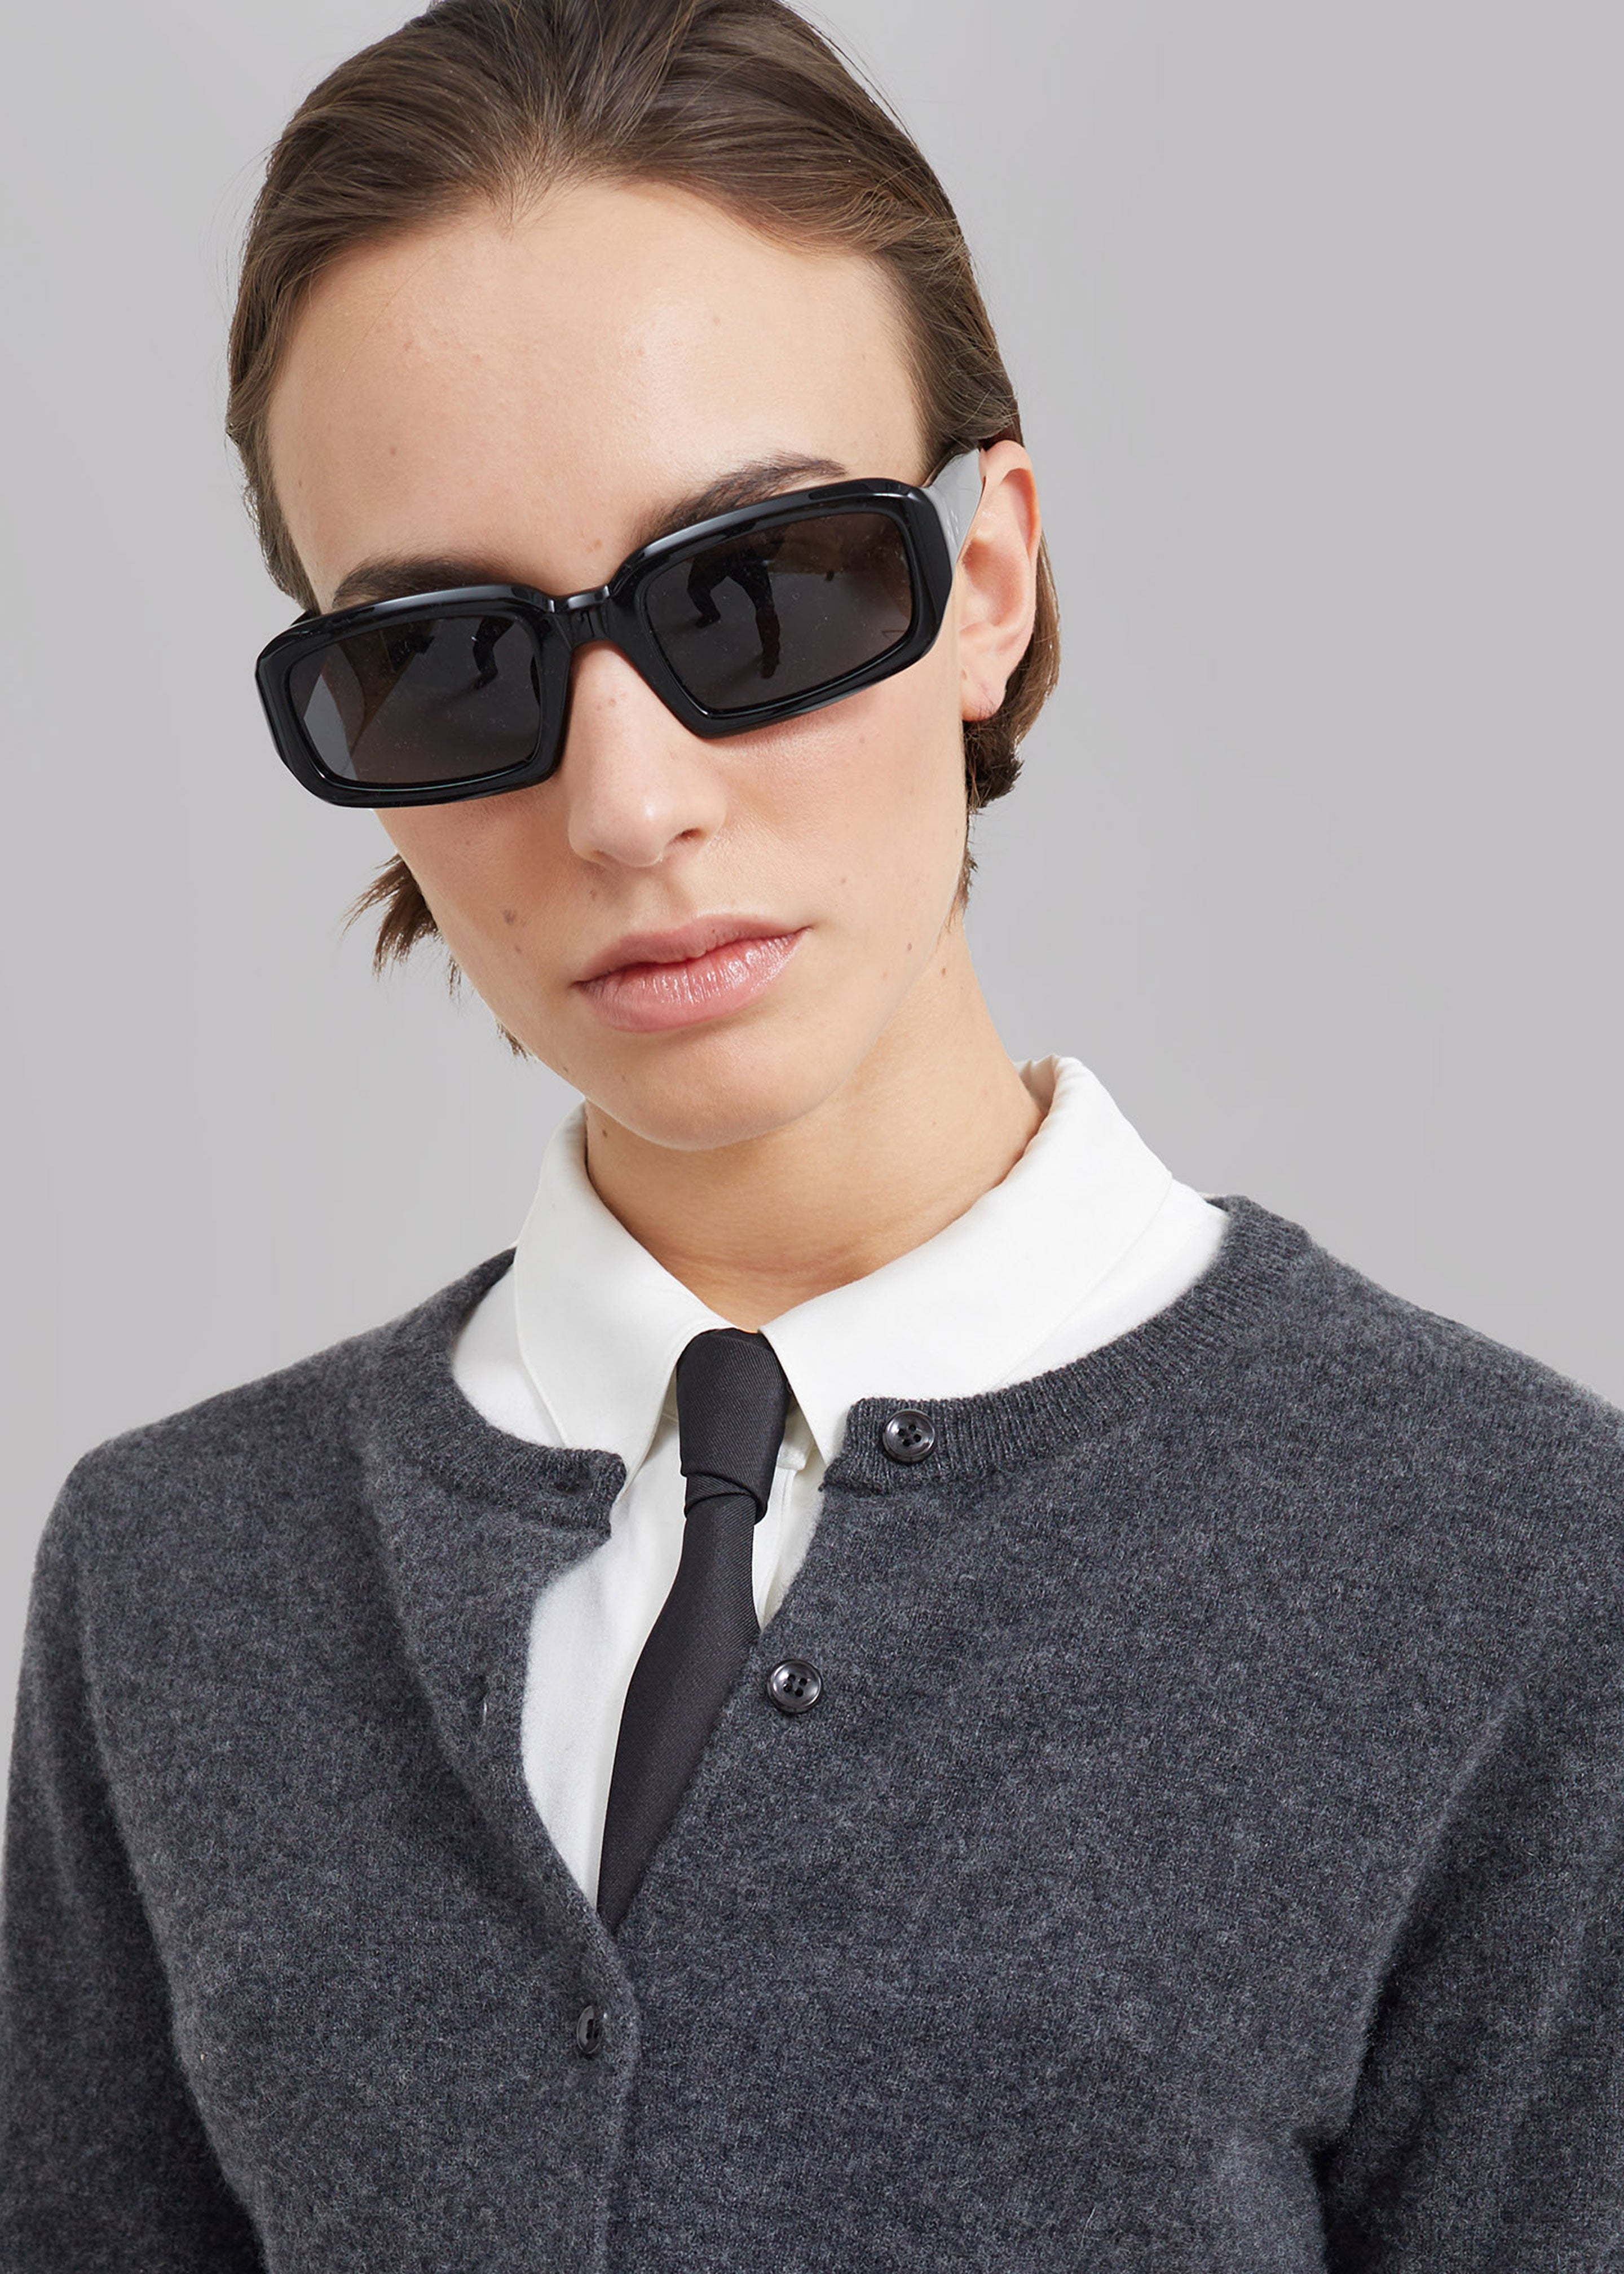 Buy Stylish Sunglasses for Men Online in India at Best Price - NNNOW